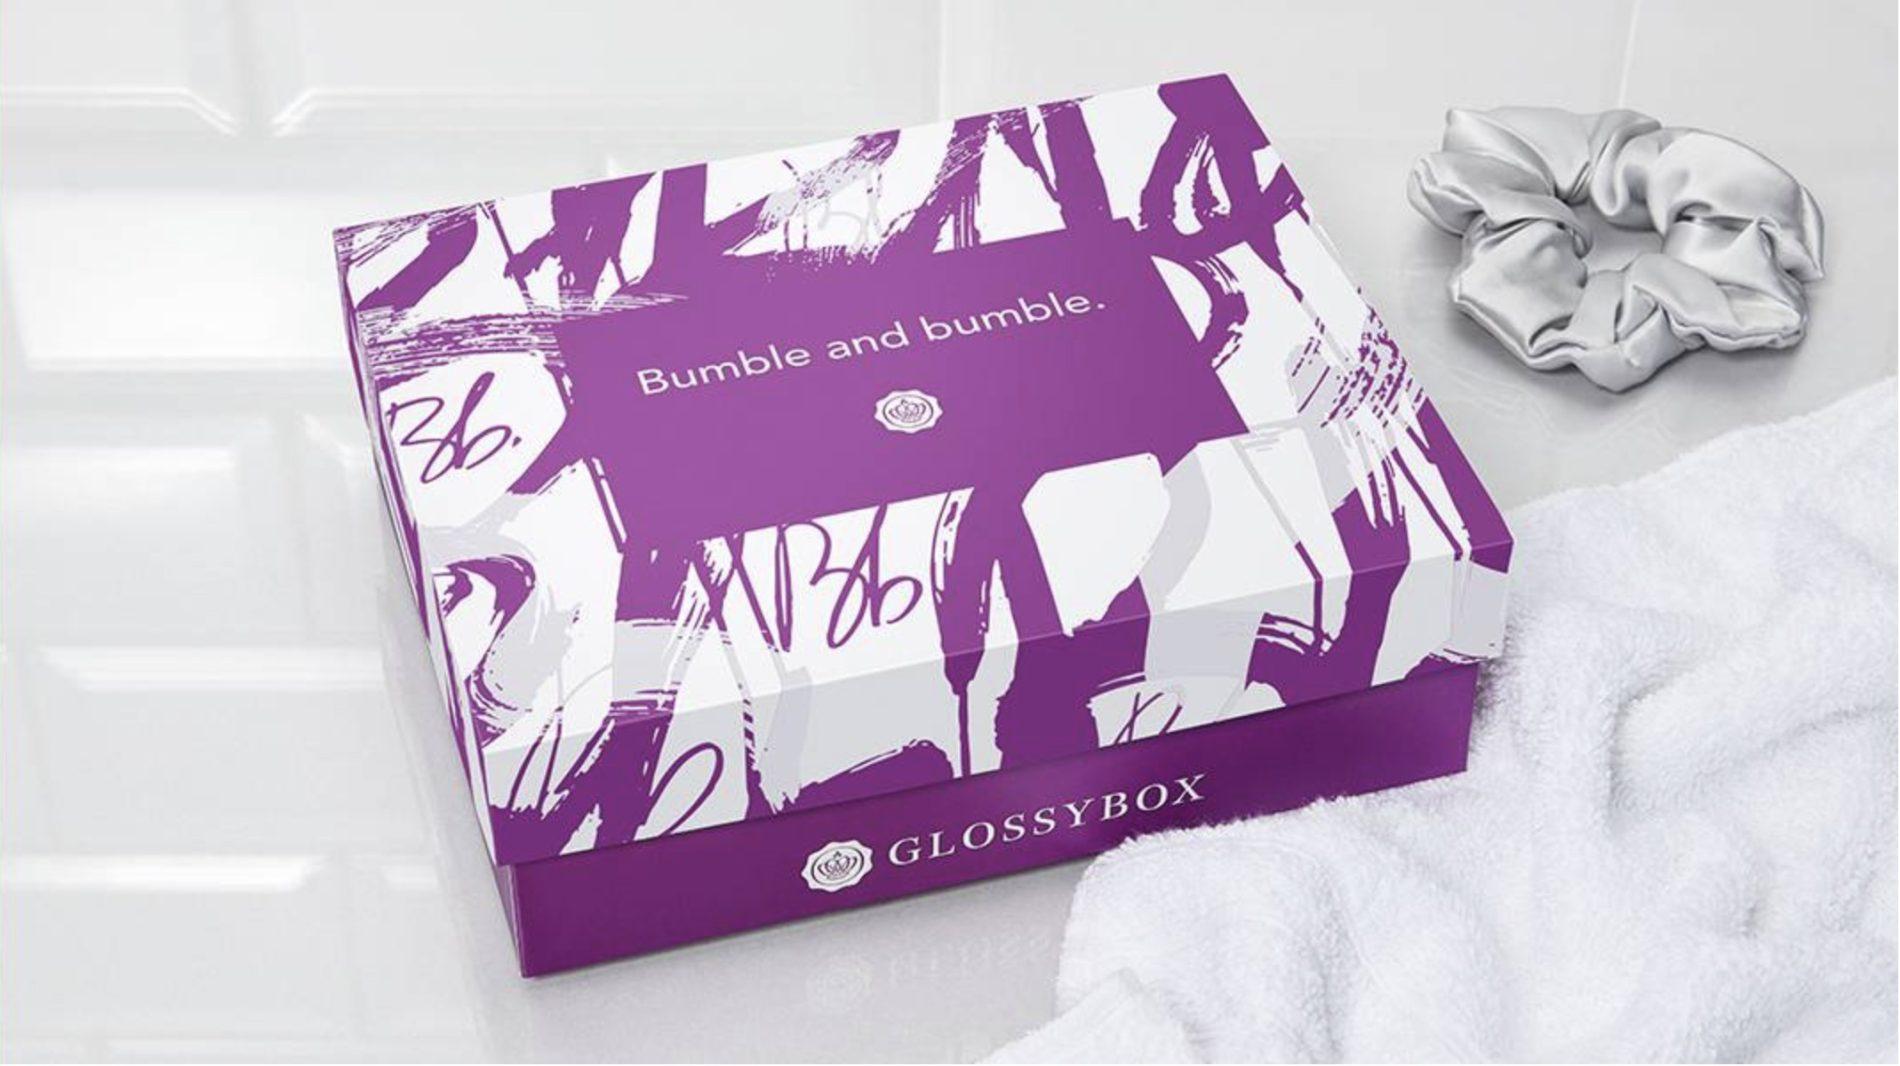 GLOSSYBOX Limited Edition Bumble & Bumble Box – On Sale Now!